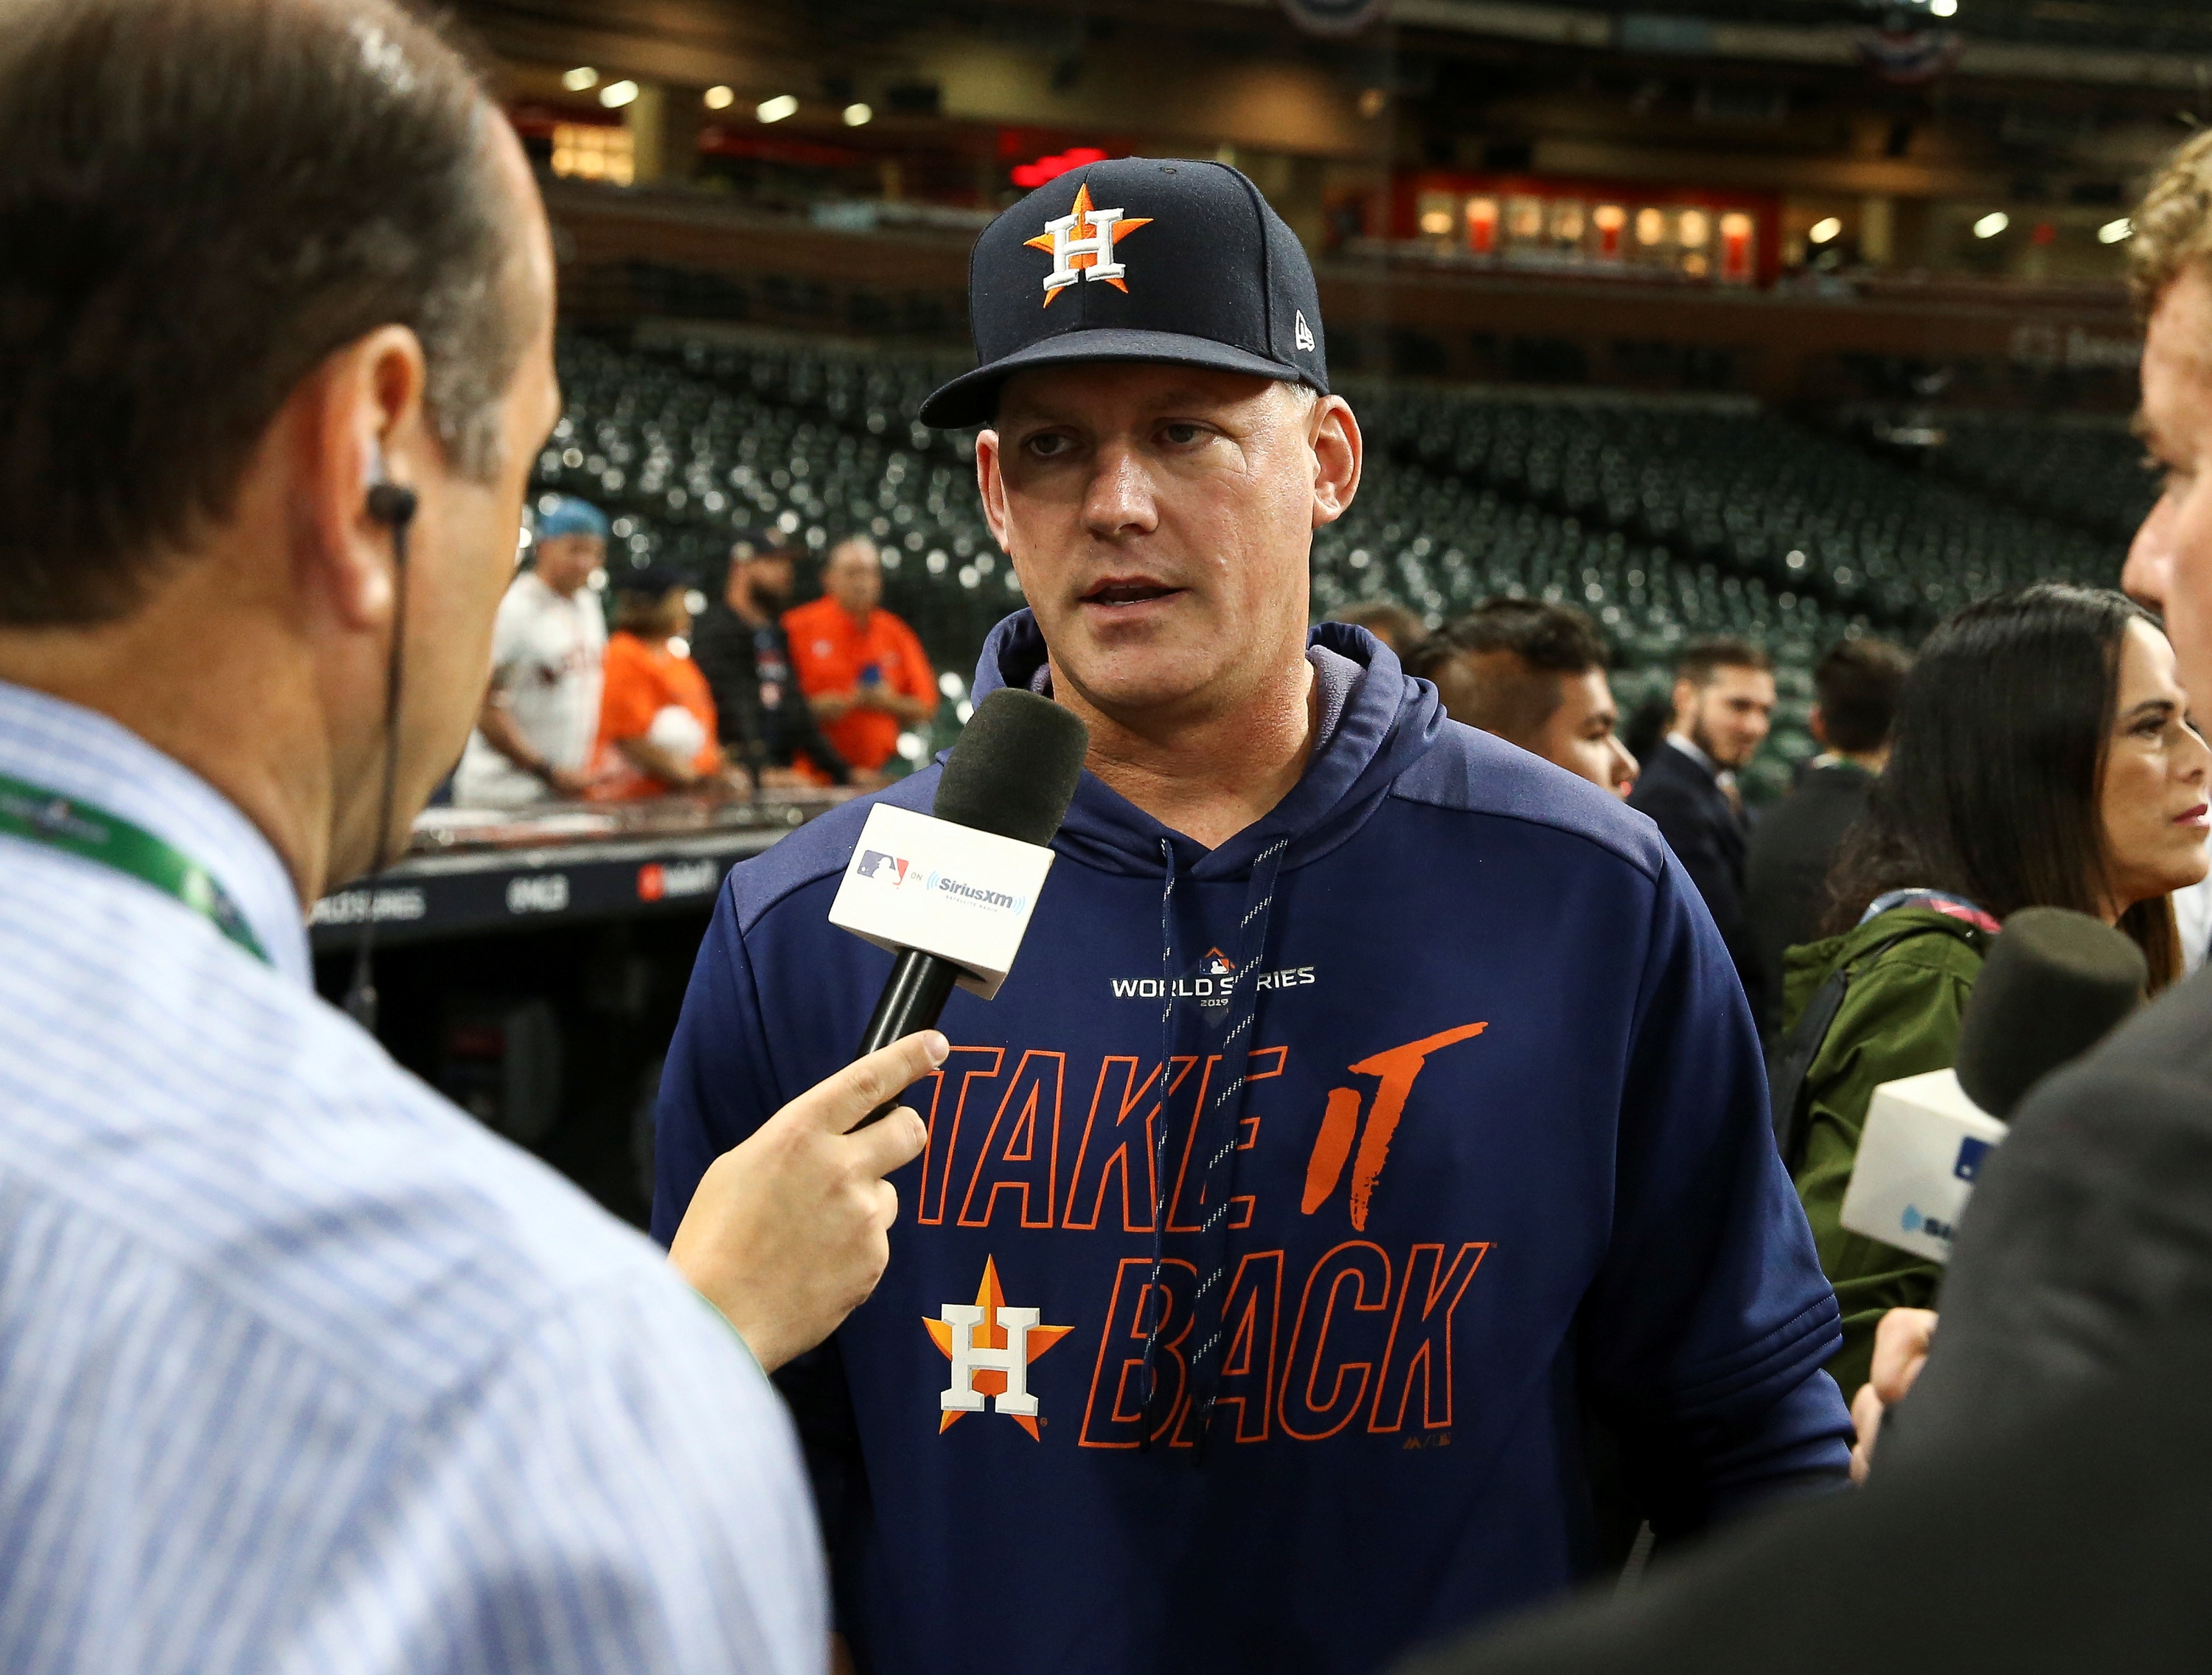 A.J. Hinch and Jeff Luhnow fired by Astros following MLB's sign